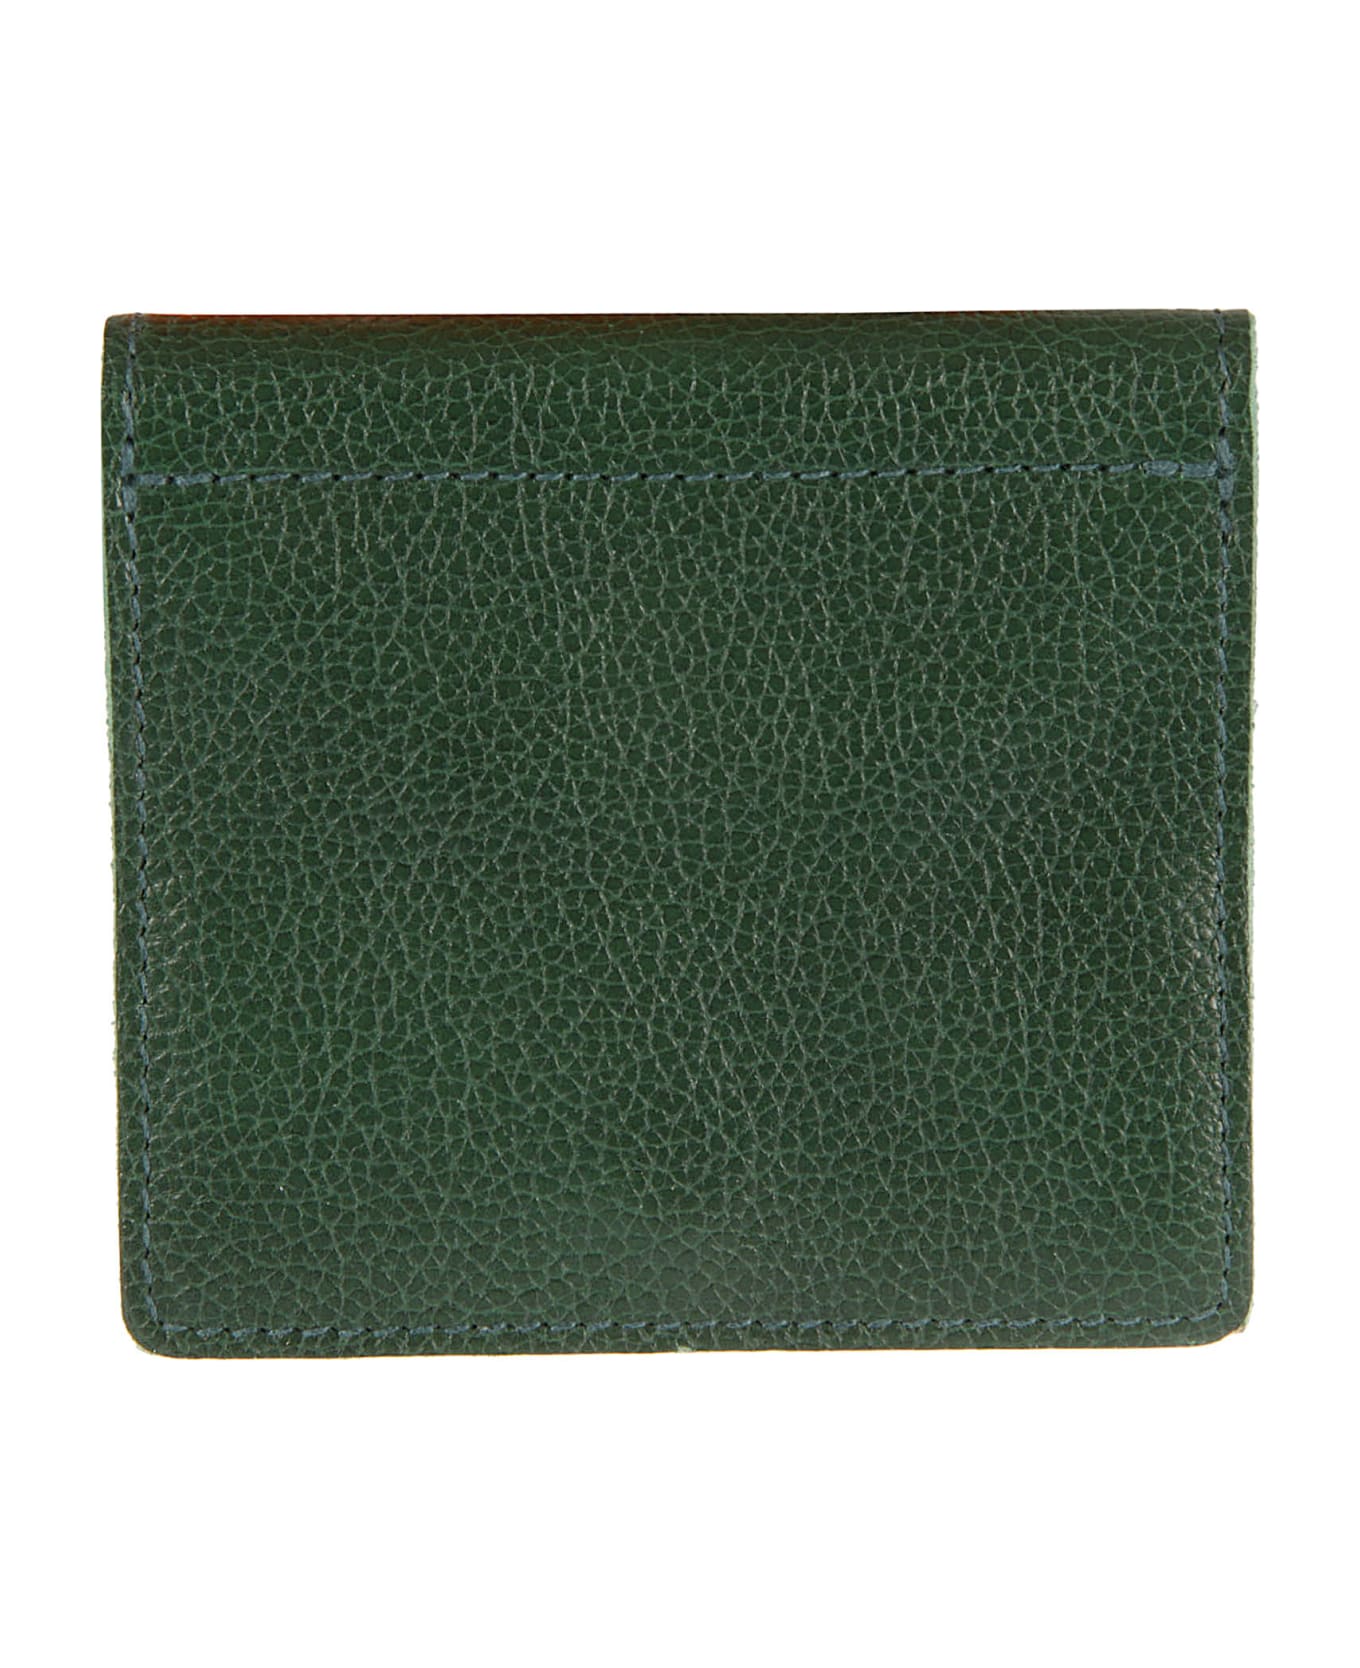 Il Bisonte Grained Leather Snap Buttoned Wallet - Green